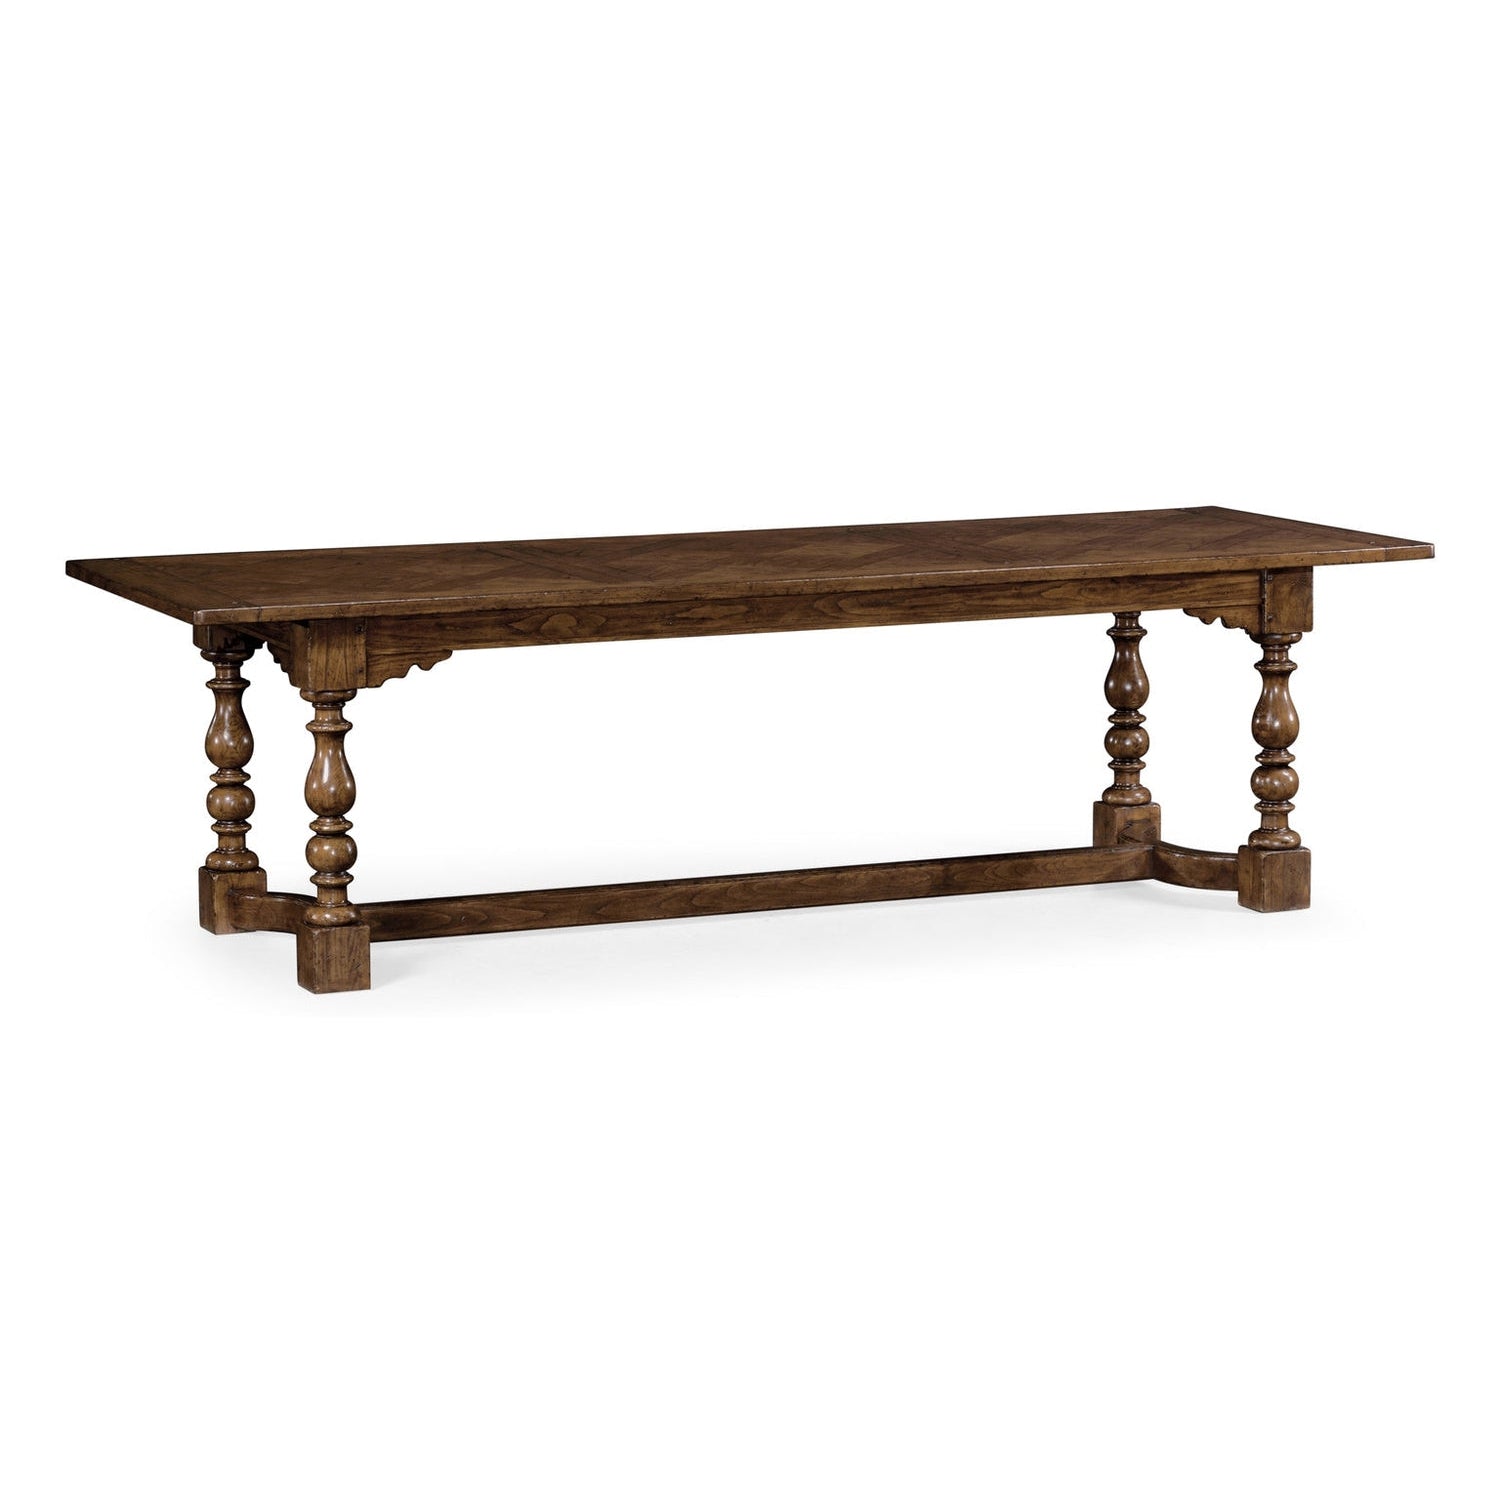 Jonathan Charles, 105" Warm Chestnut Library Dining Table